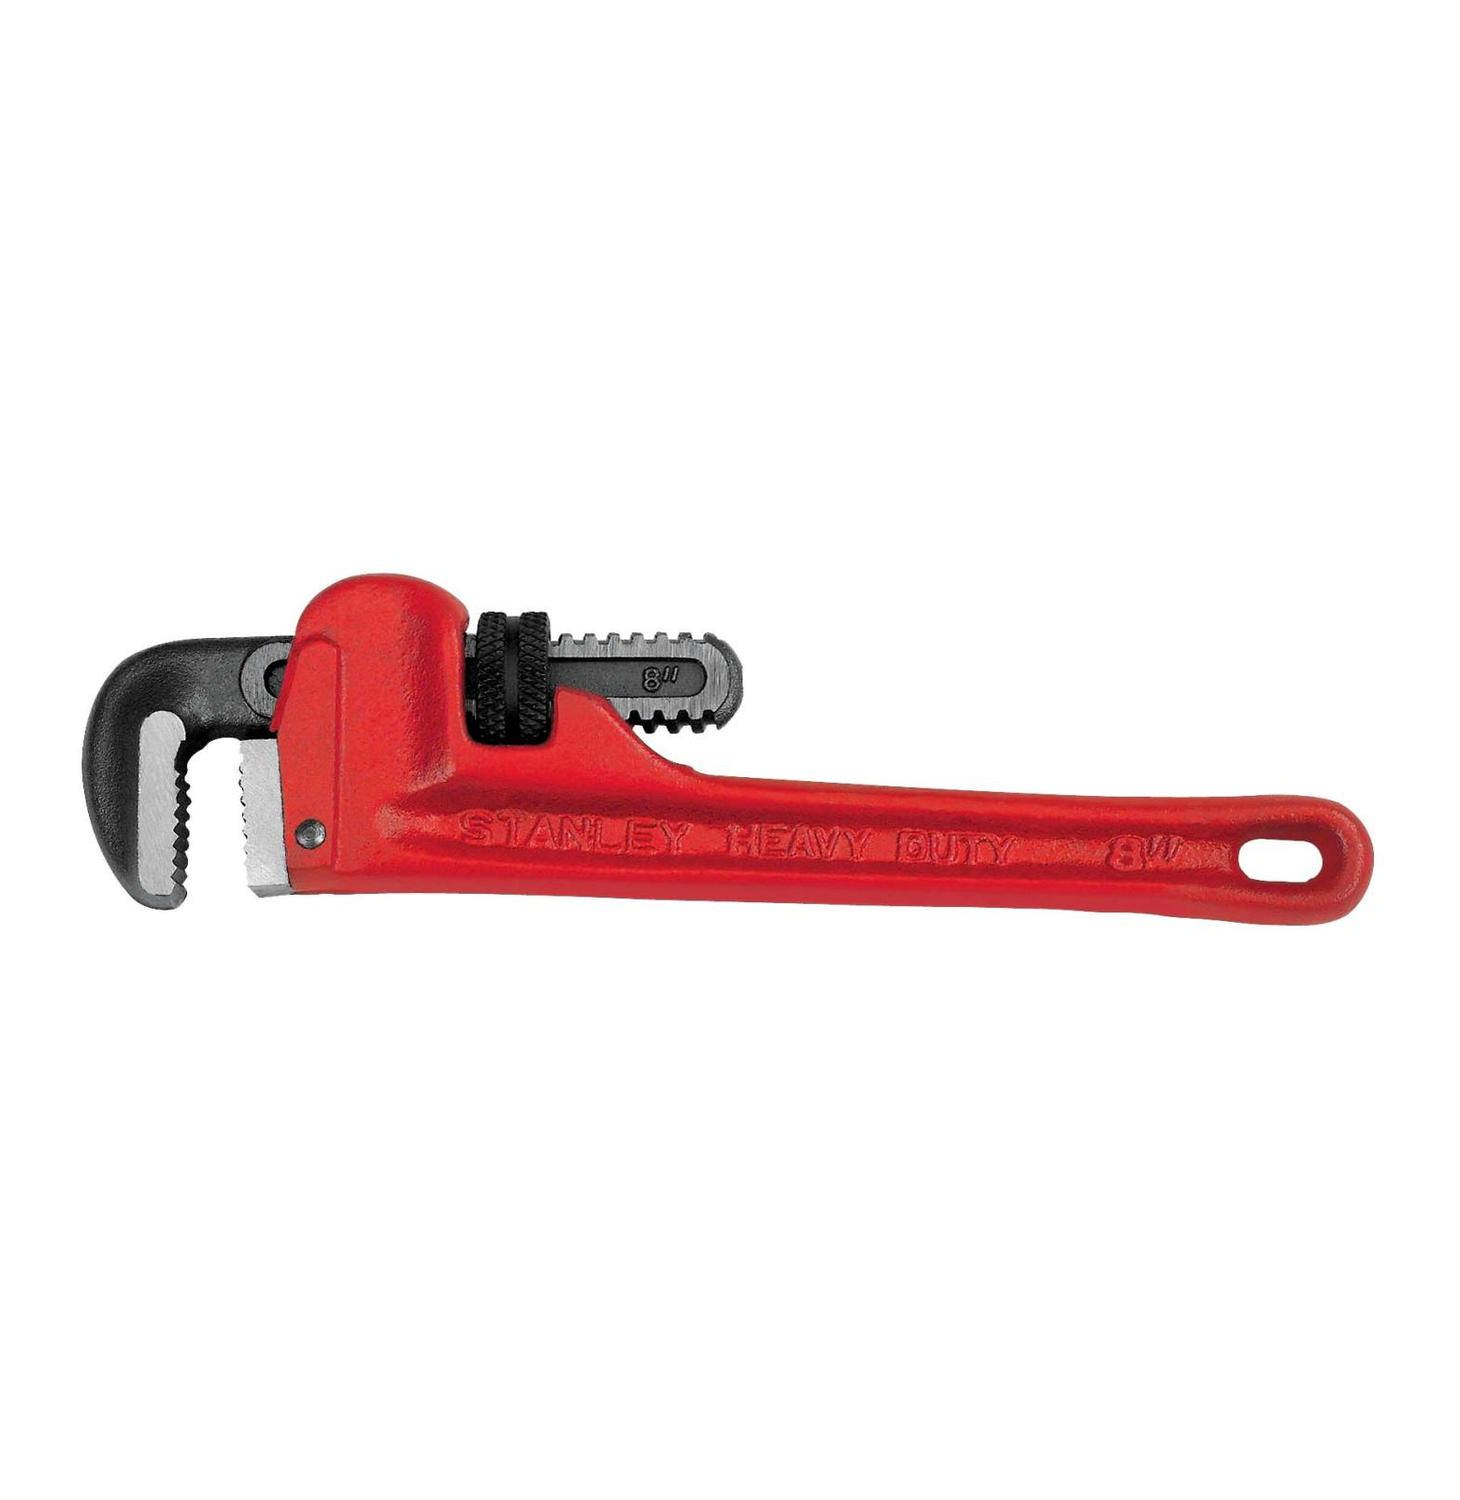 Pipe wrench photo